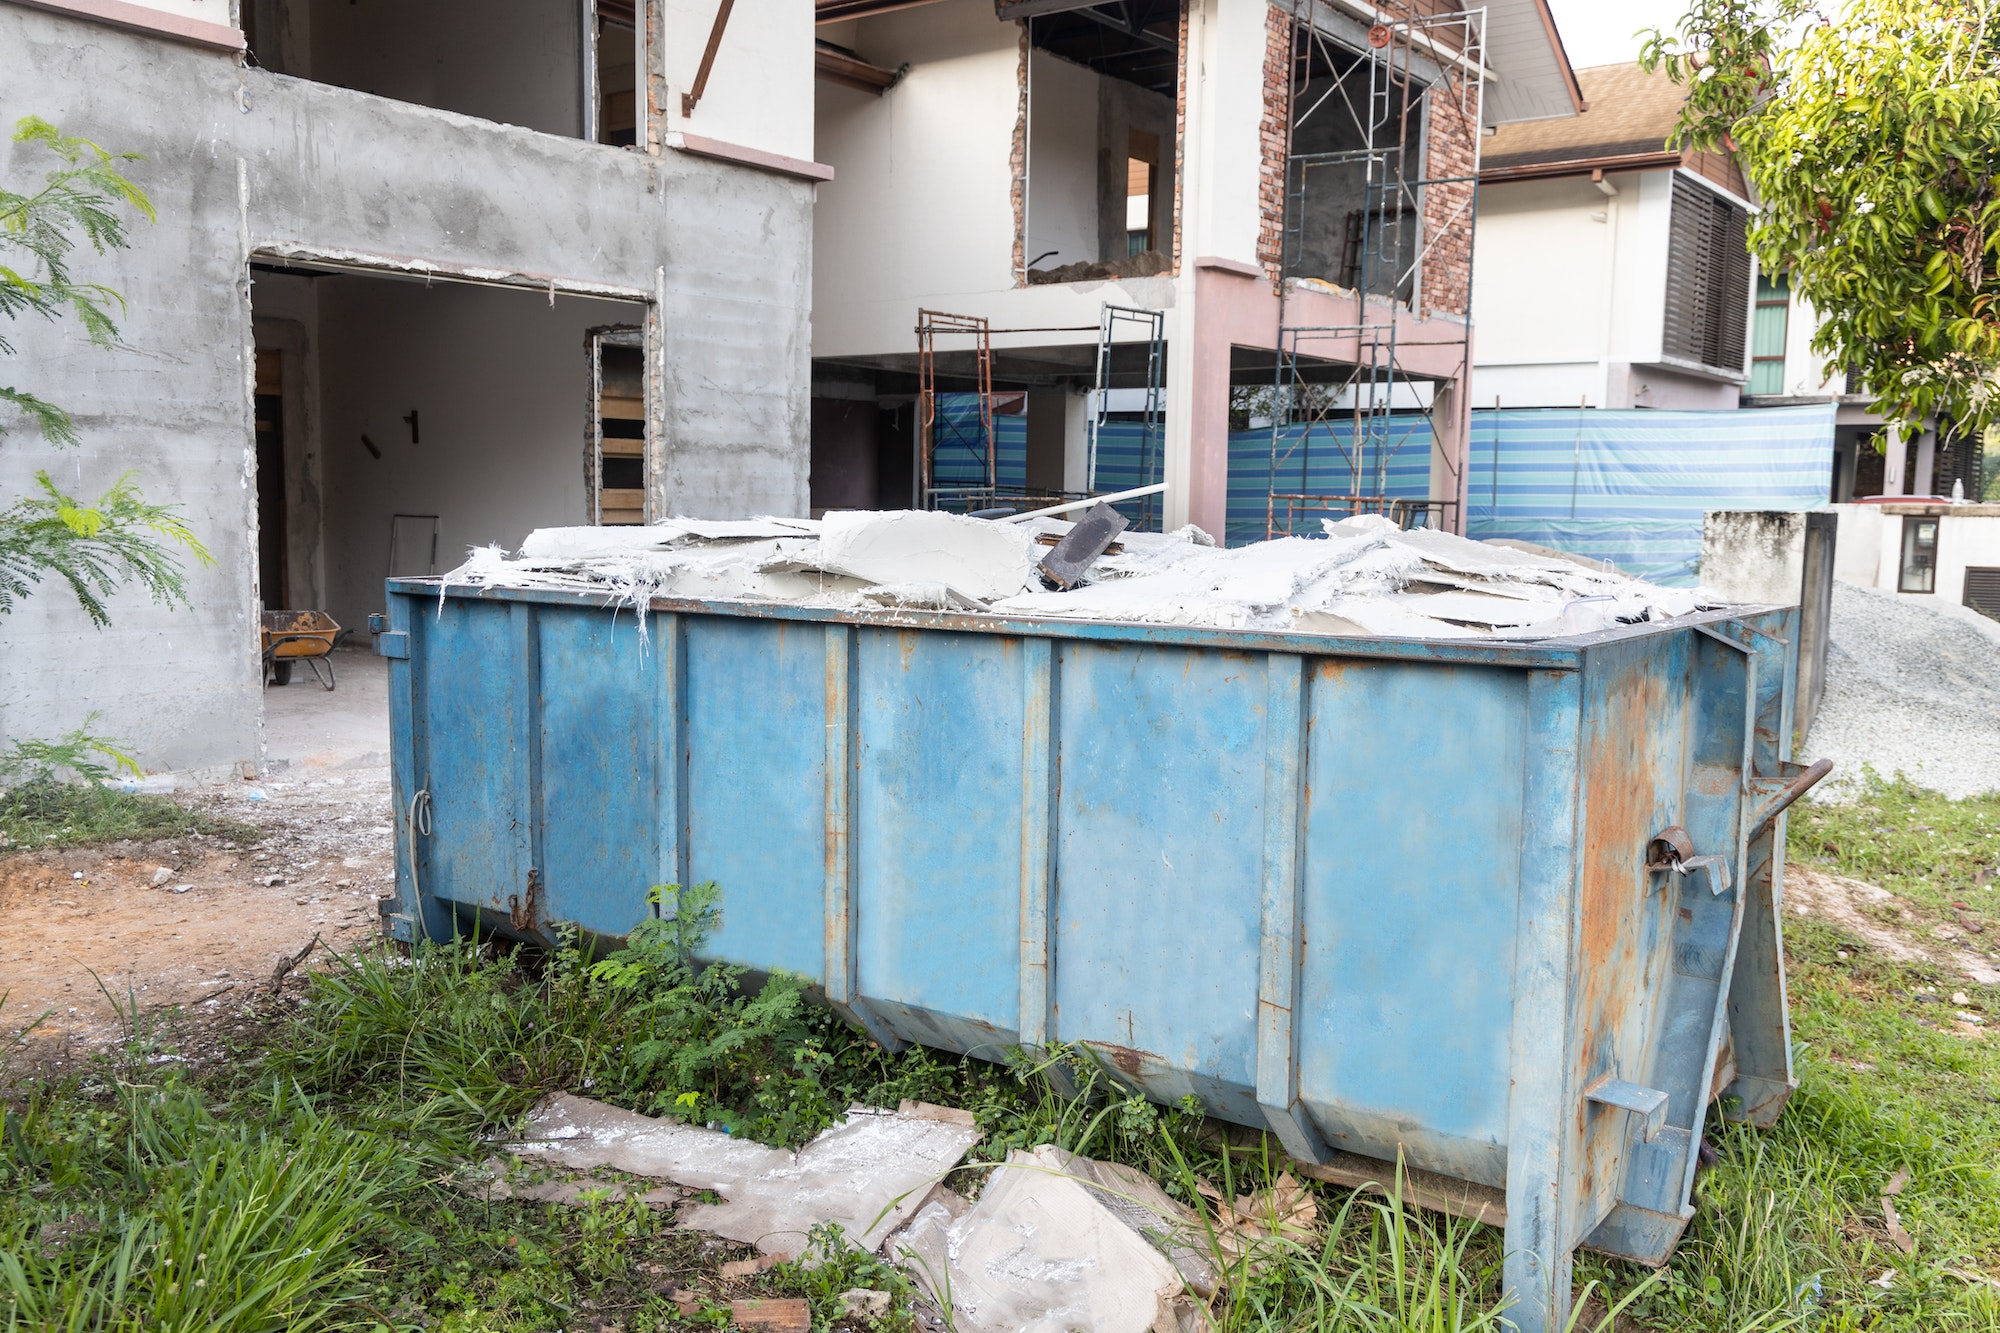 Garbage roro dumpter bin collects rubbish at construction site